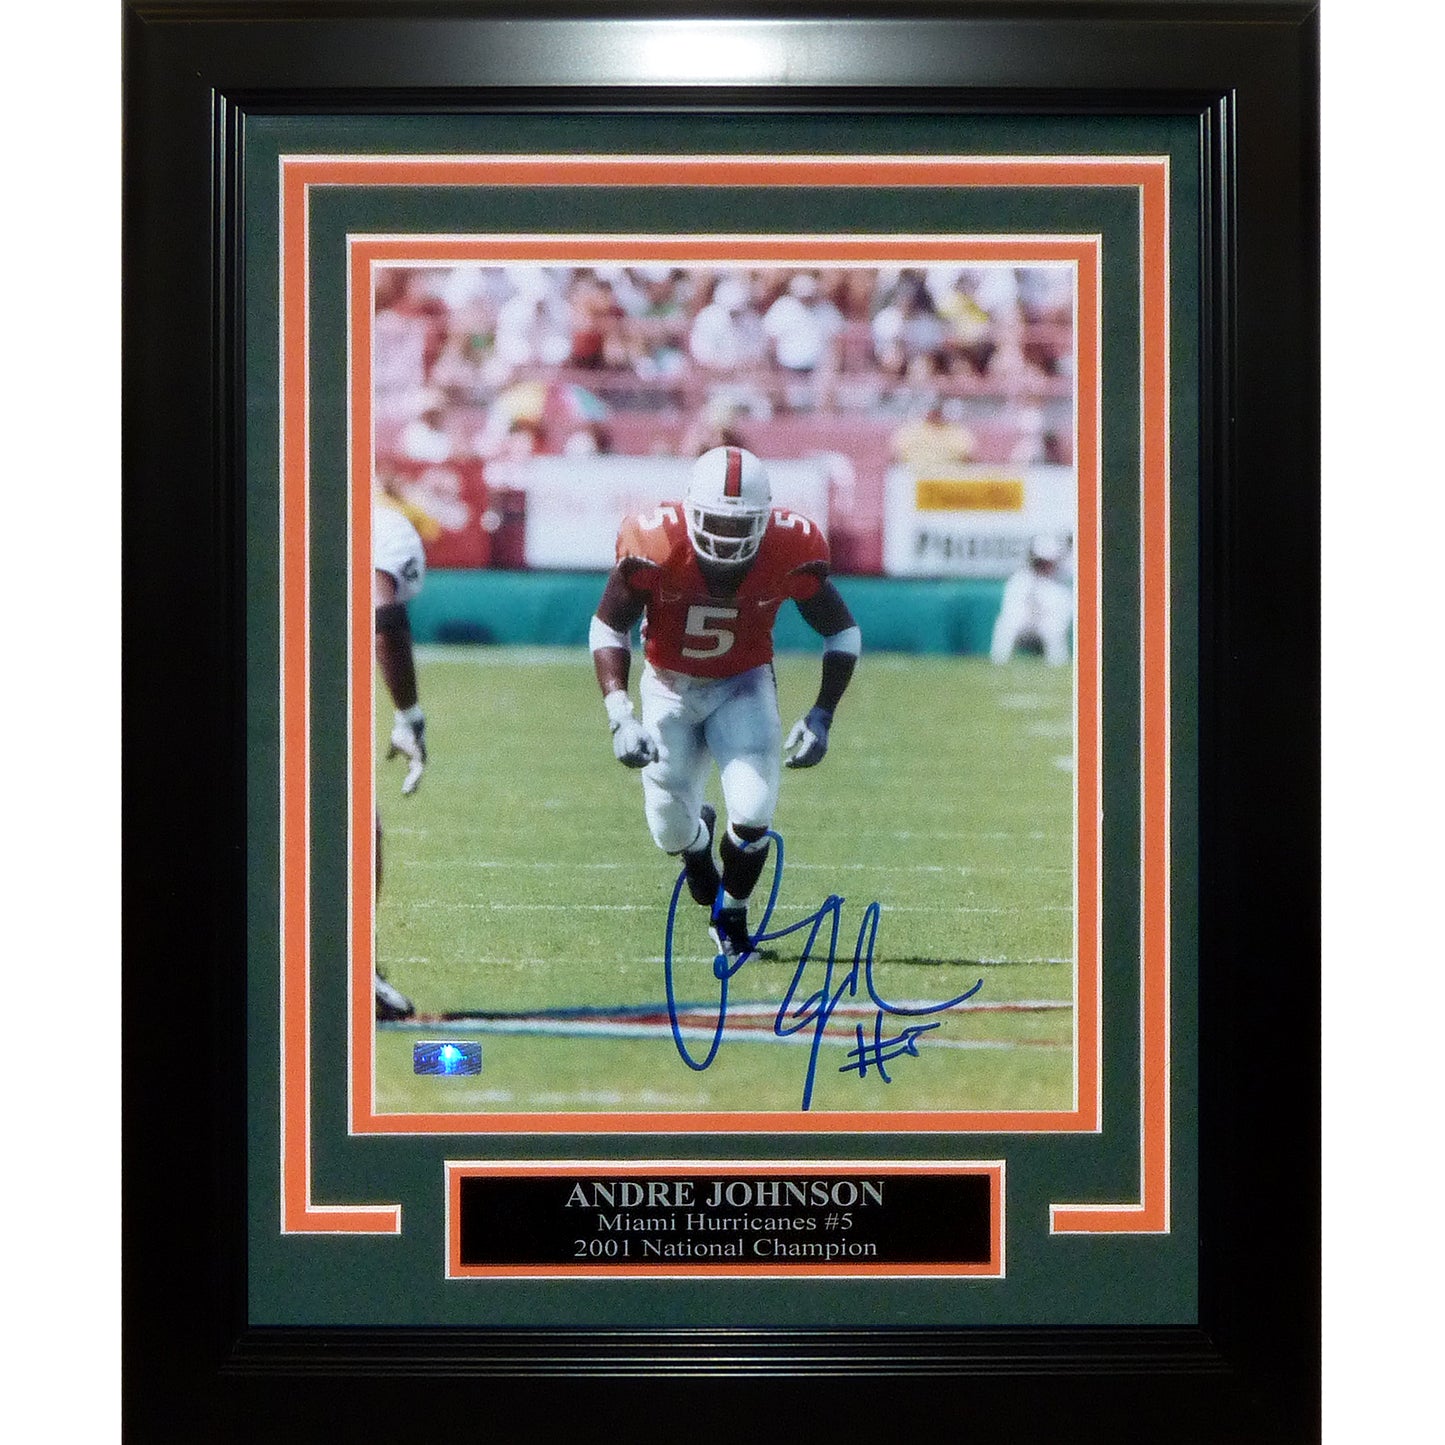 Andre Johnson Autographed Miami Hurricanes Deluxe Framed 8x10 Photo